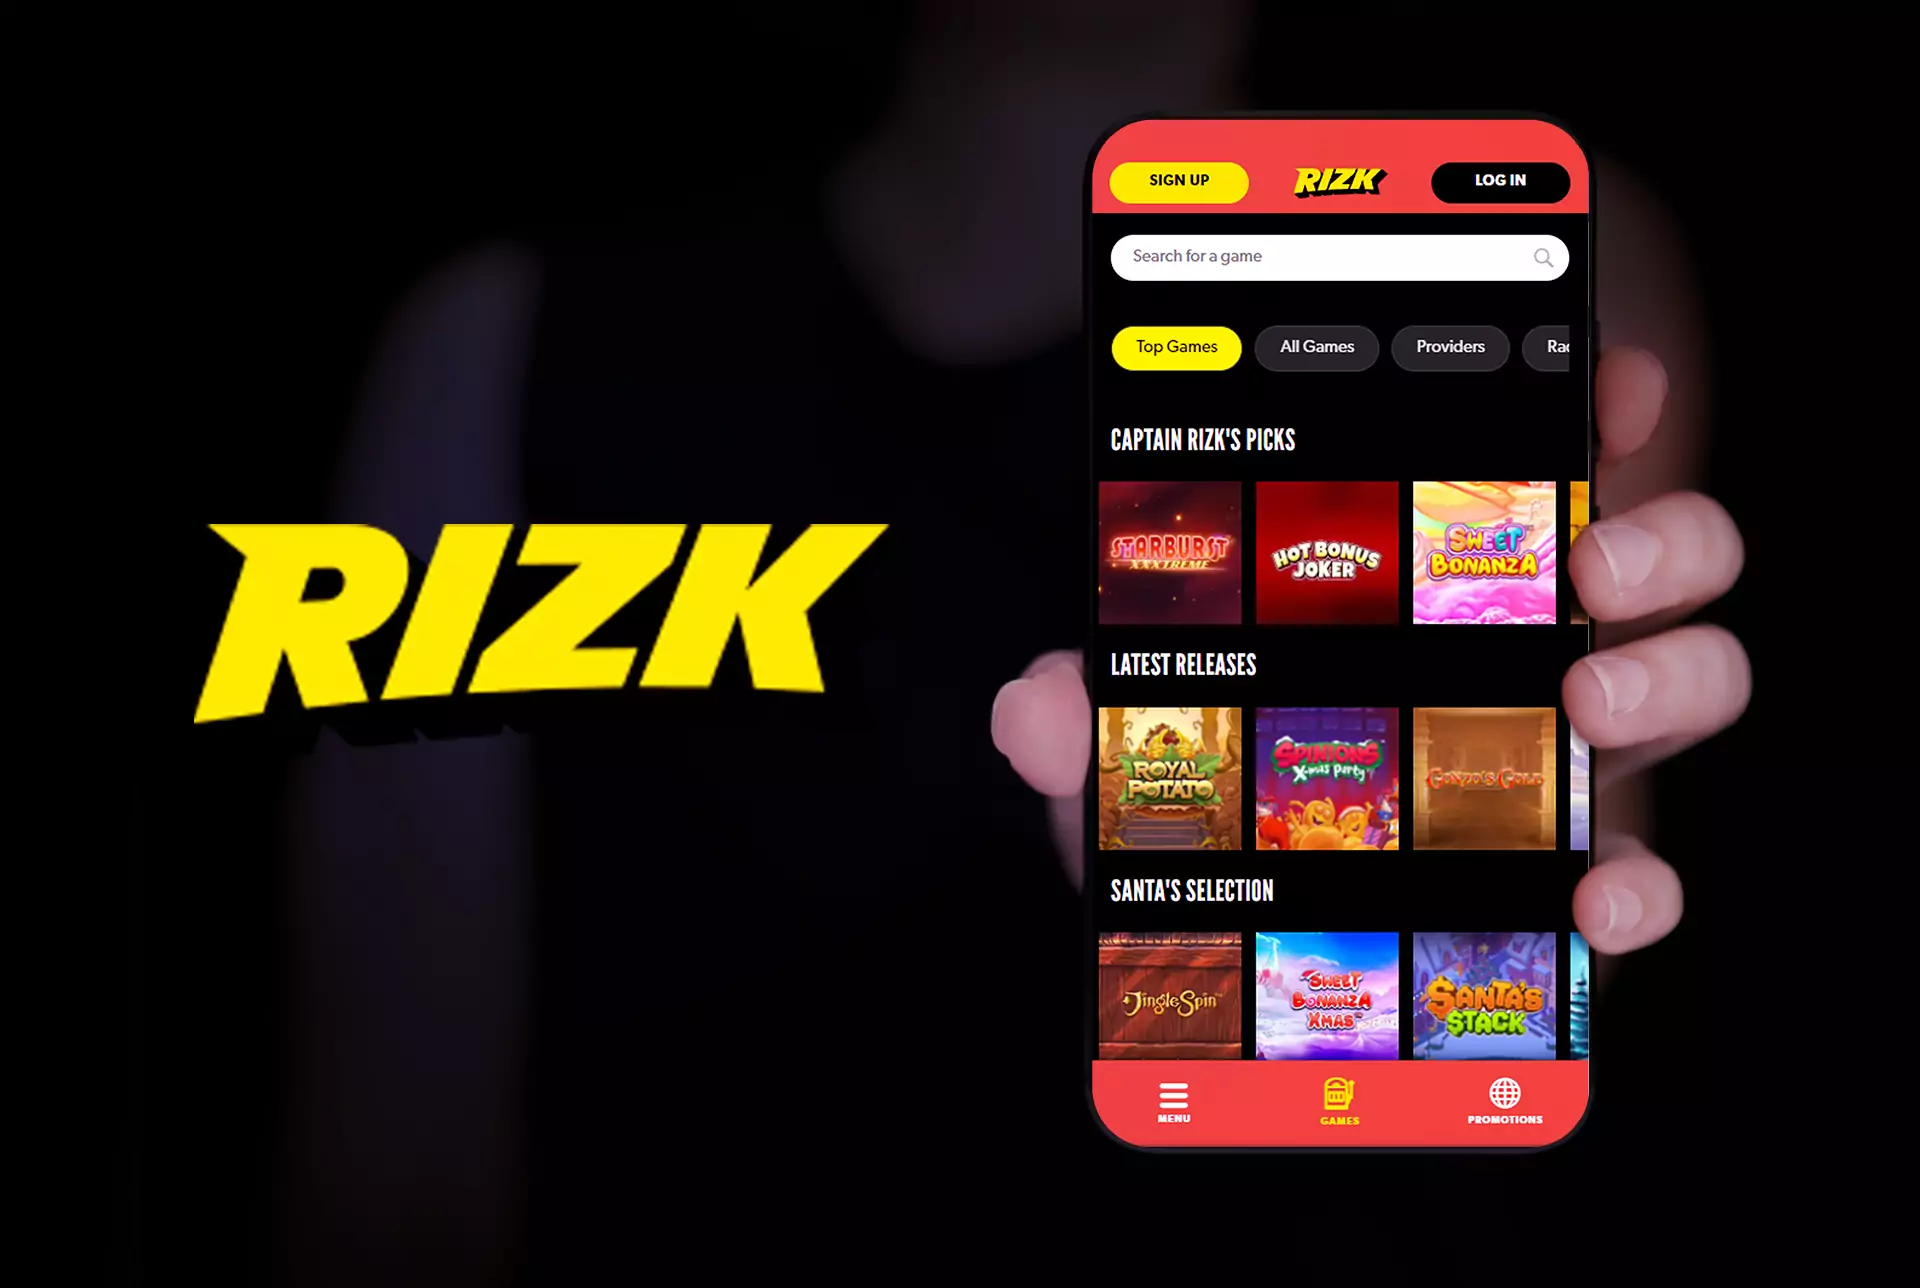 The Rizk Casino has an average welcome bonus of up to 20000 INR and its own leveling system.